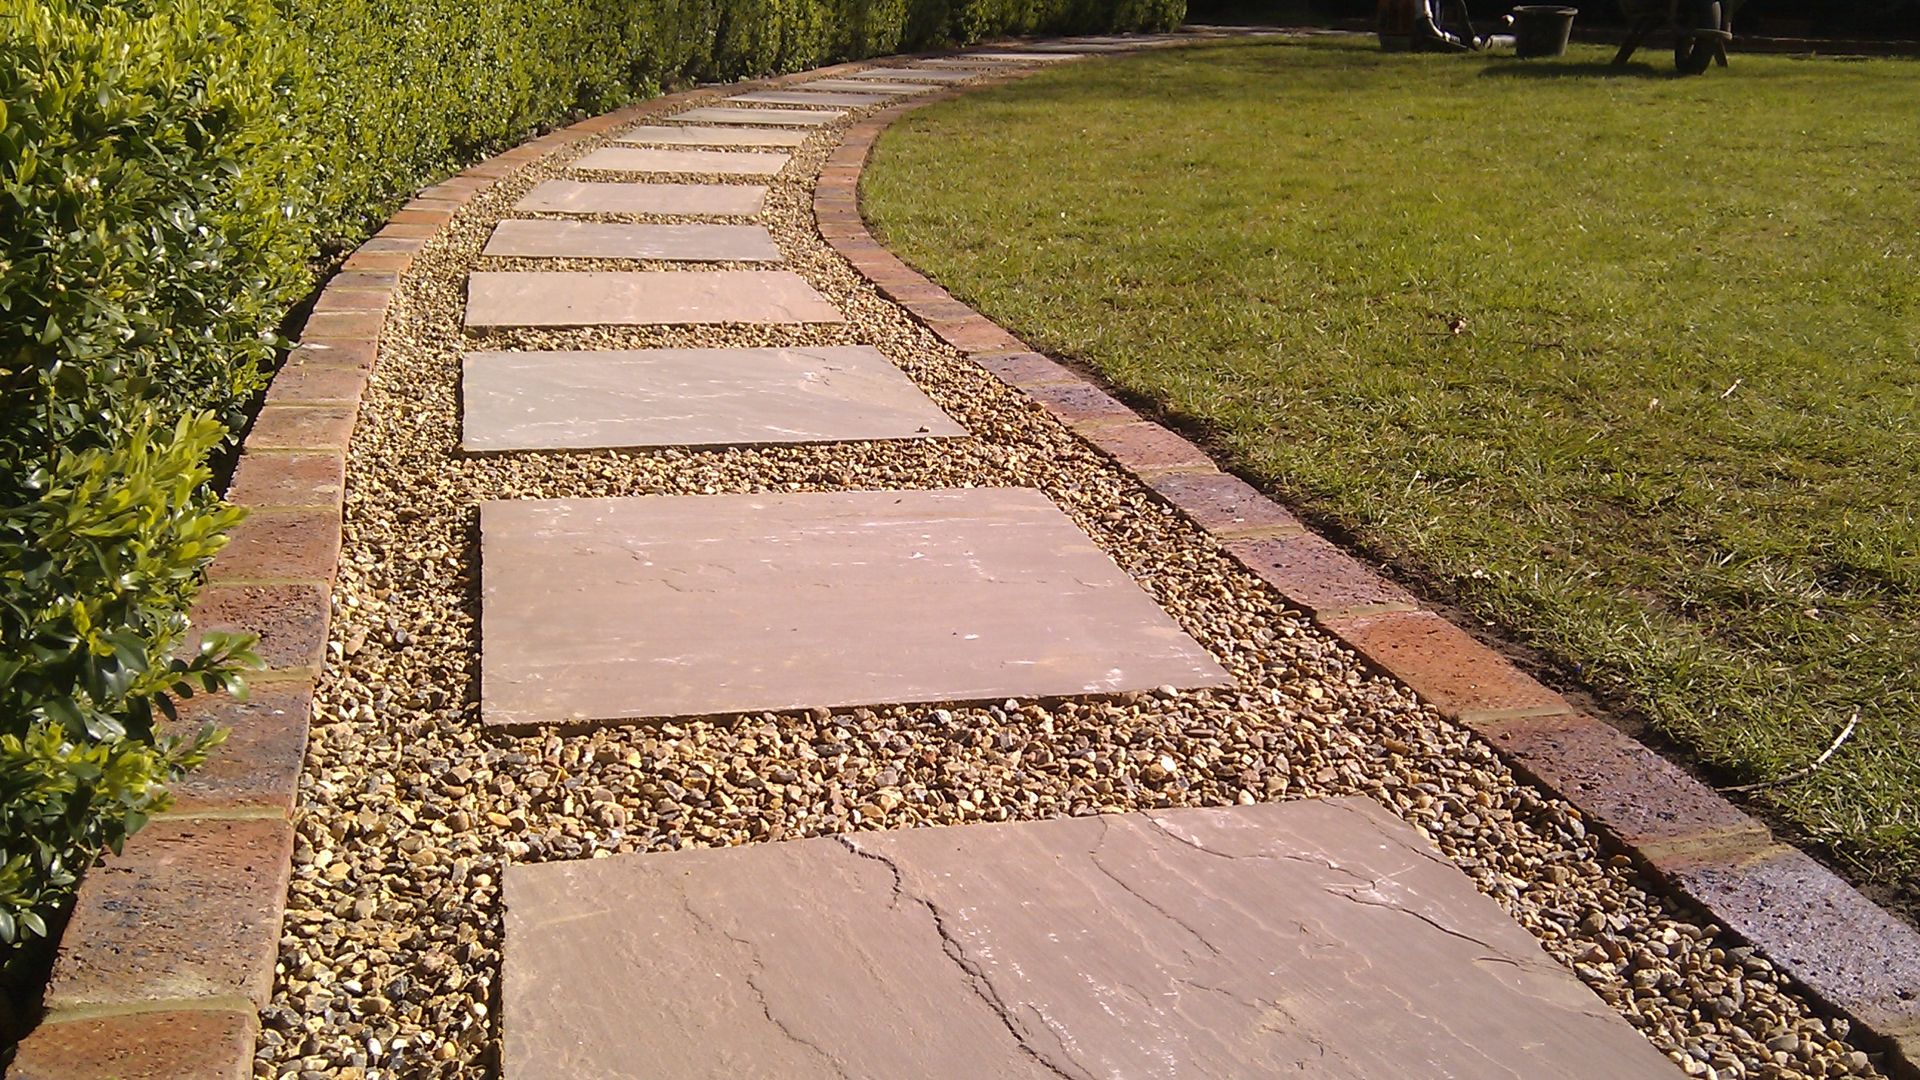 winding path - paving slabs in shingle - leading away next to lawn.